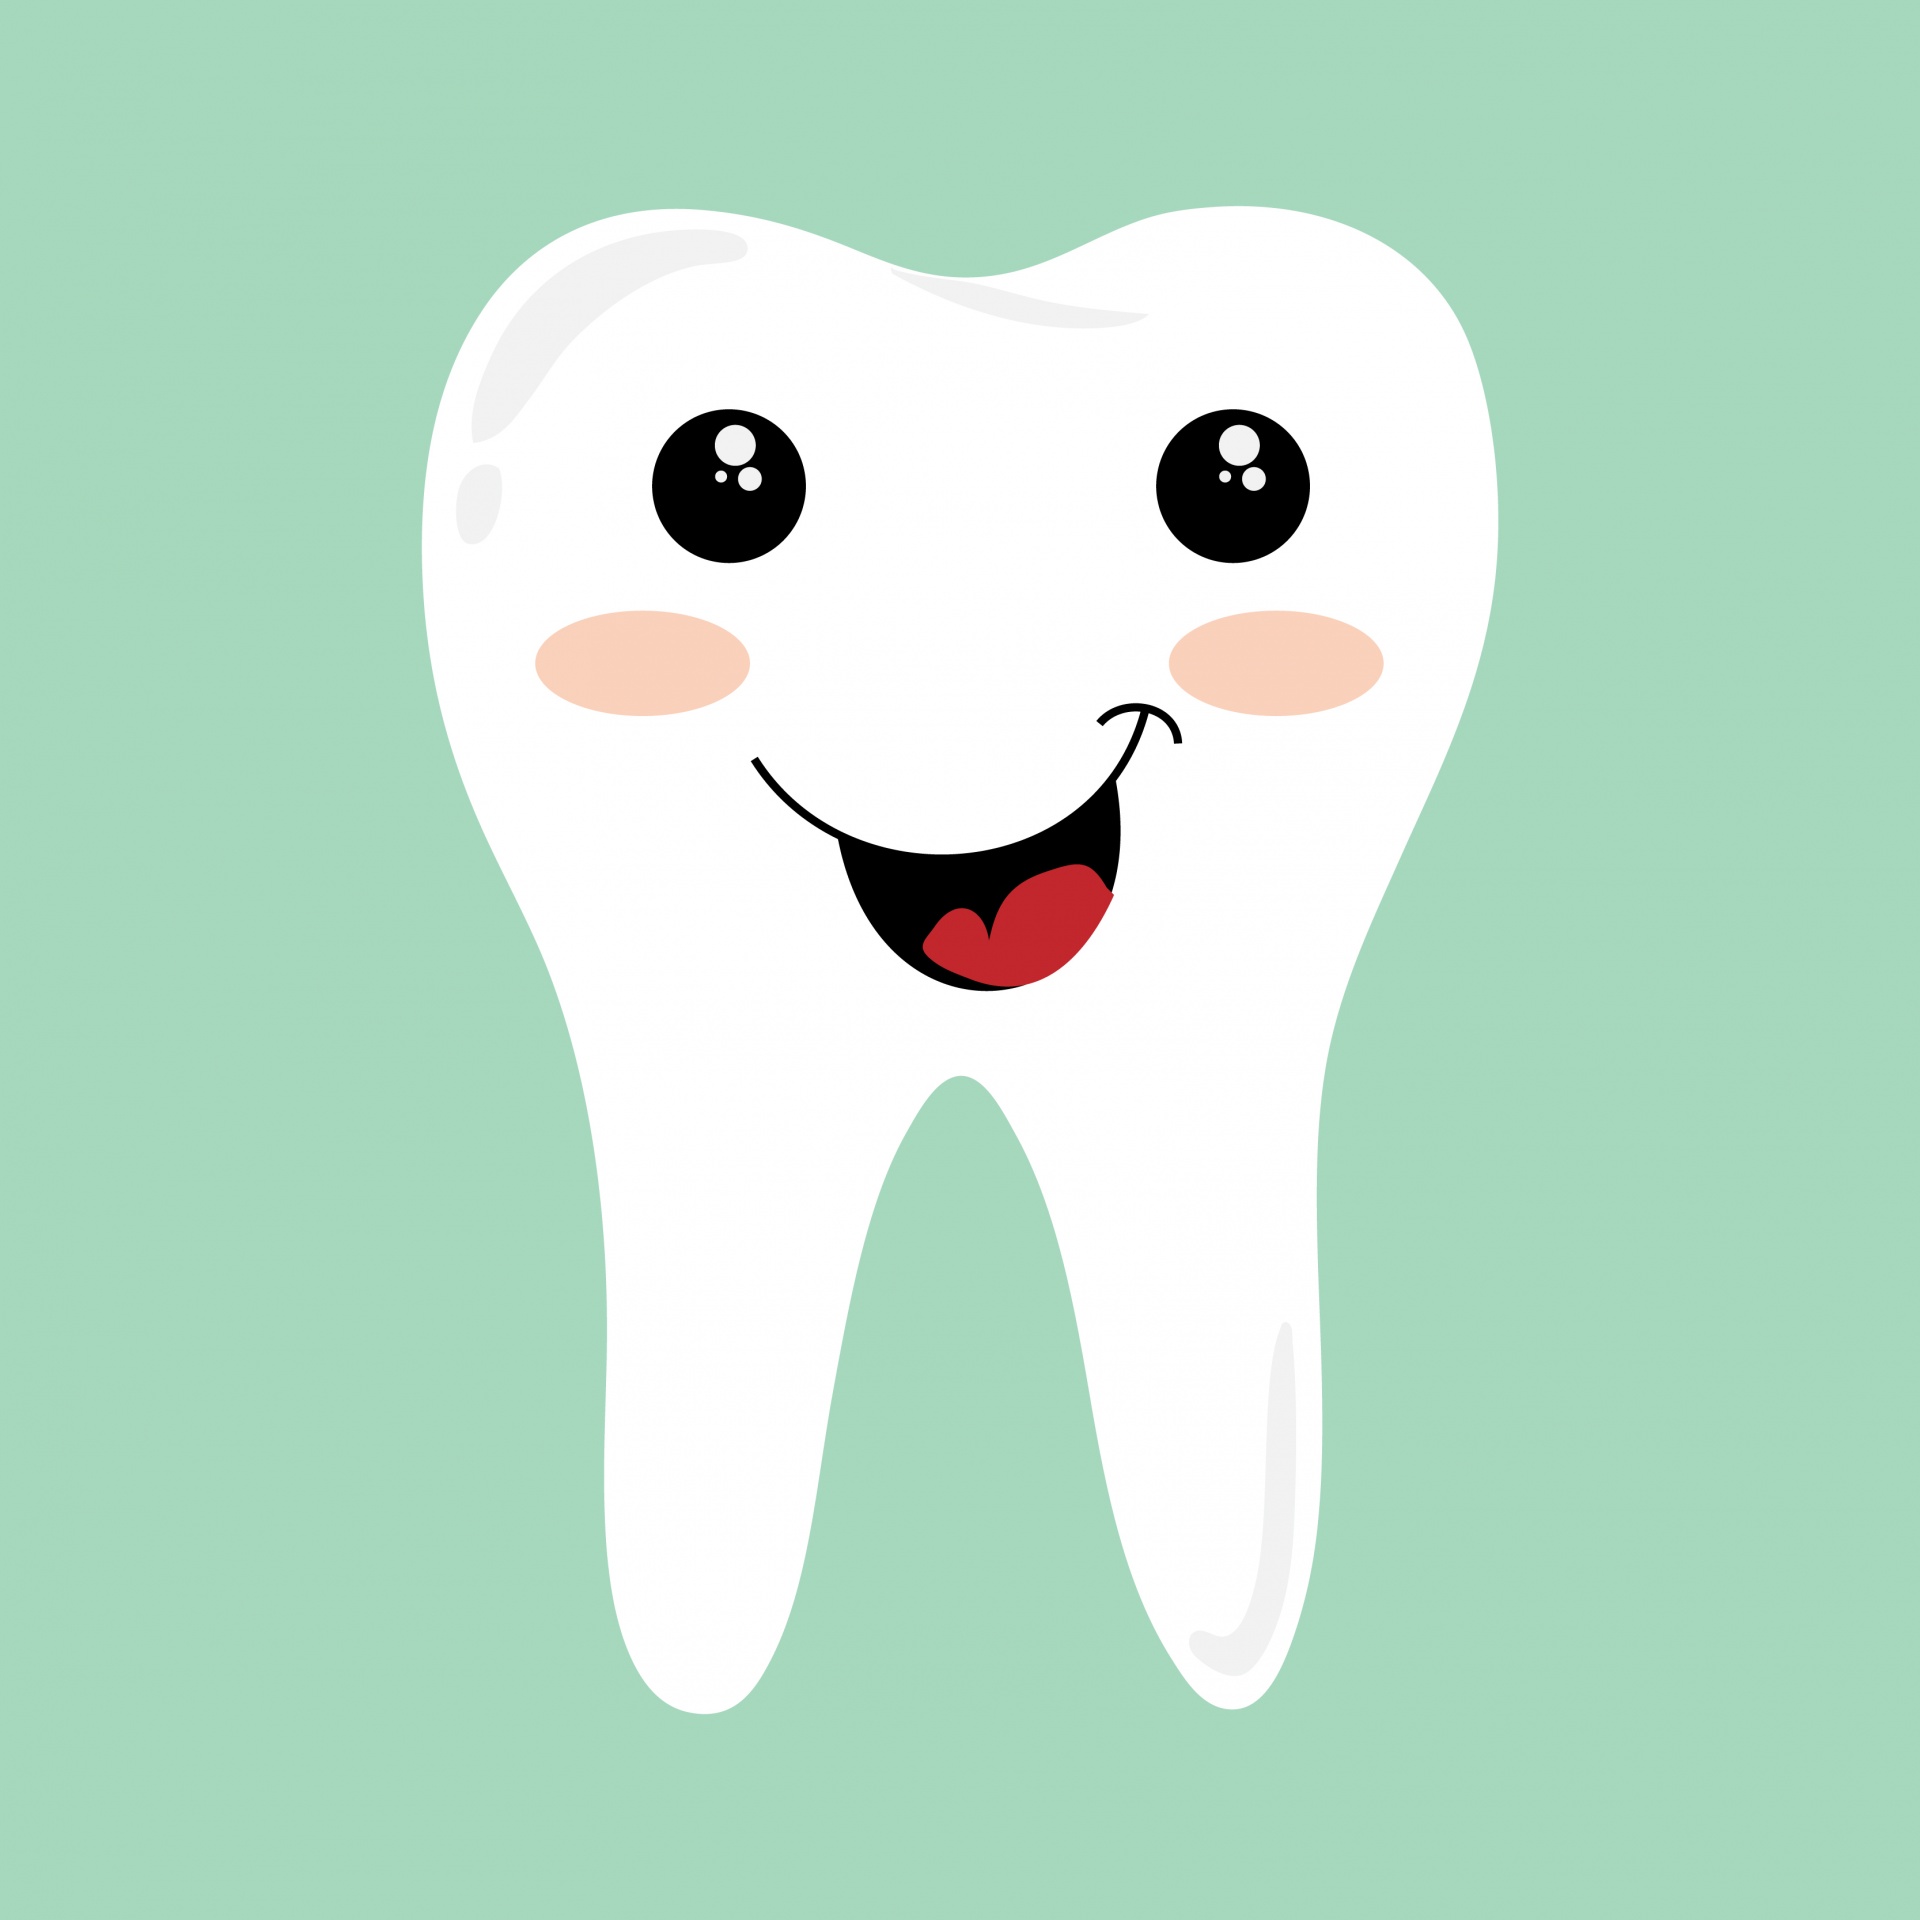 Tooth,cartoon,illustration,drawing,cute - free image from 